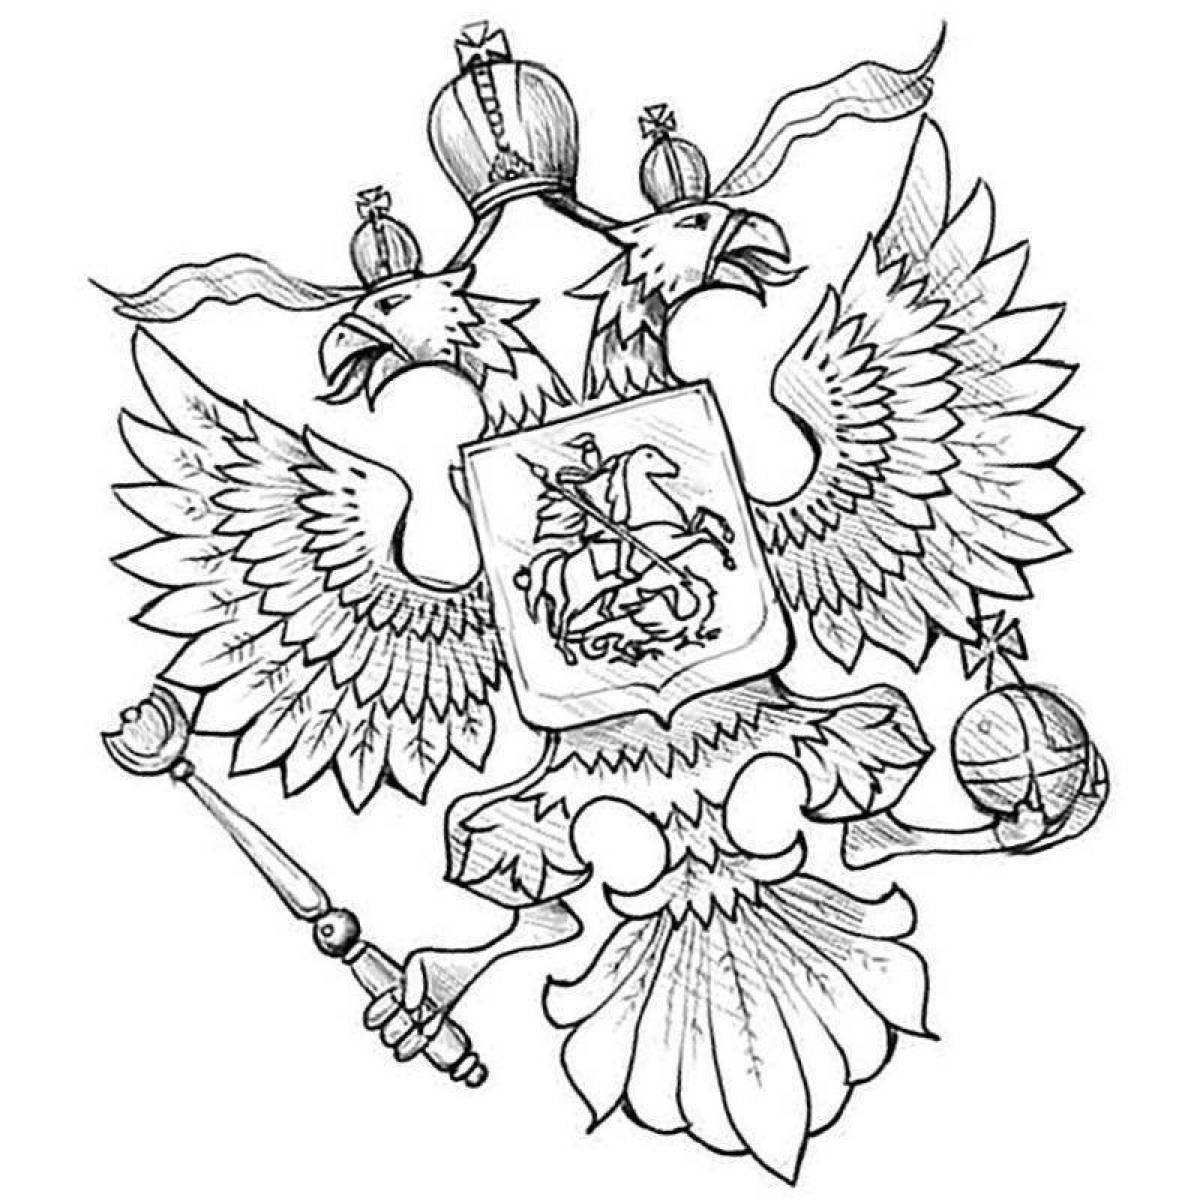 Great coat of arms of russia coloring page